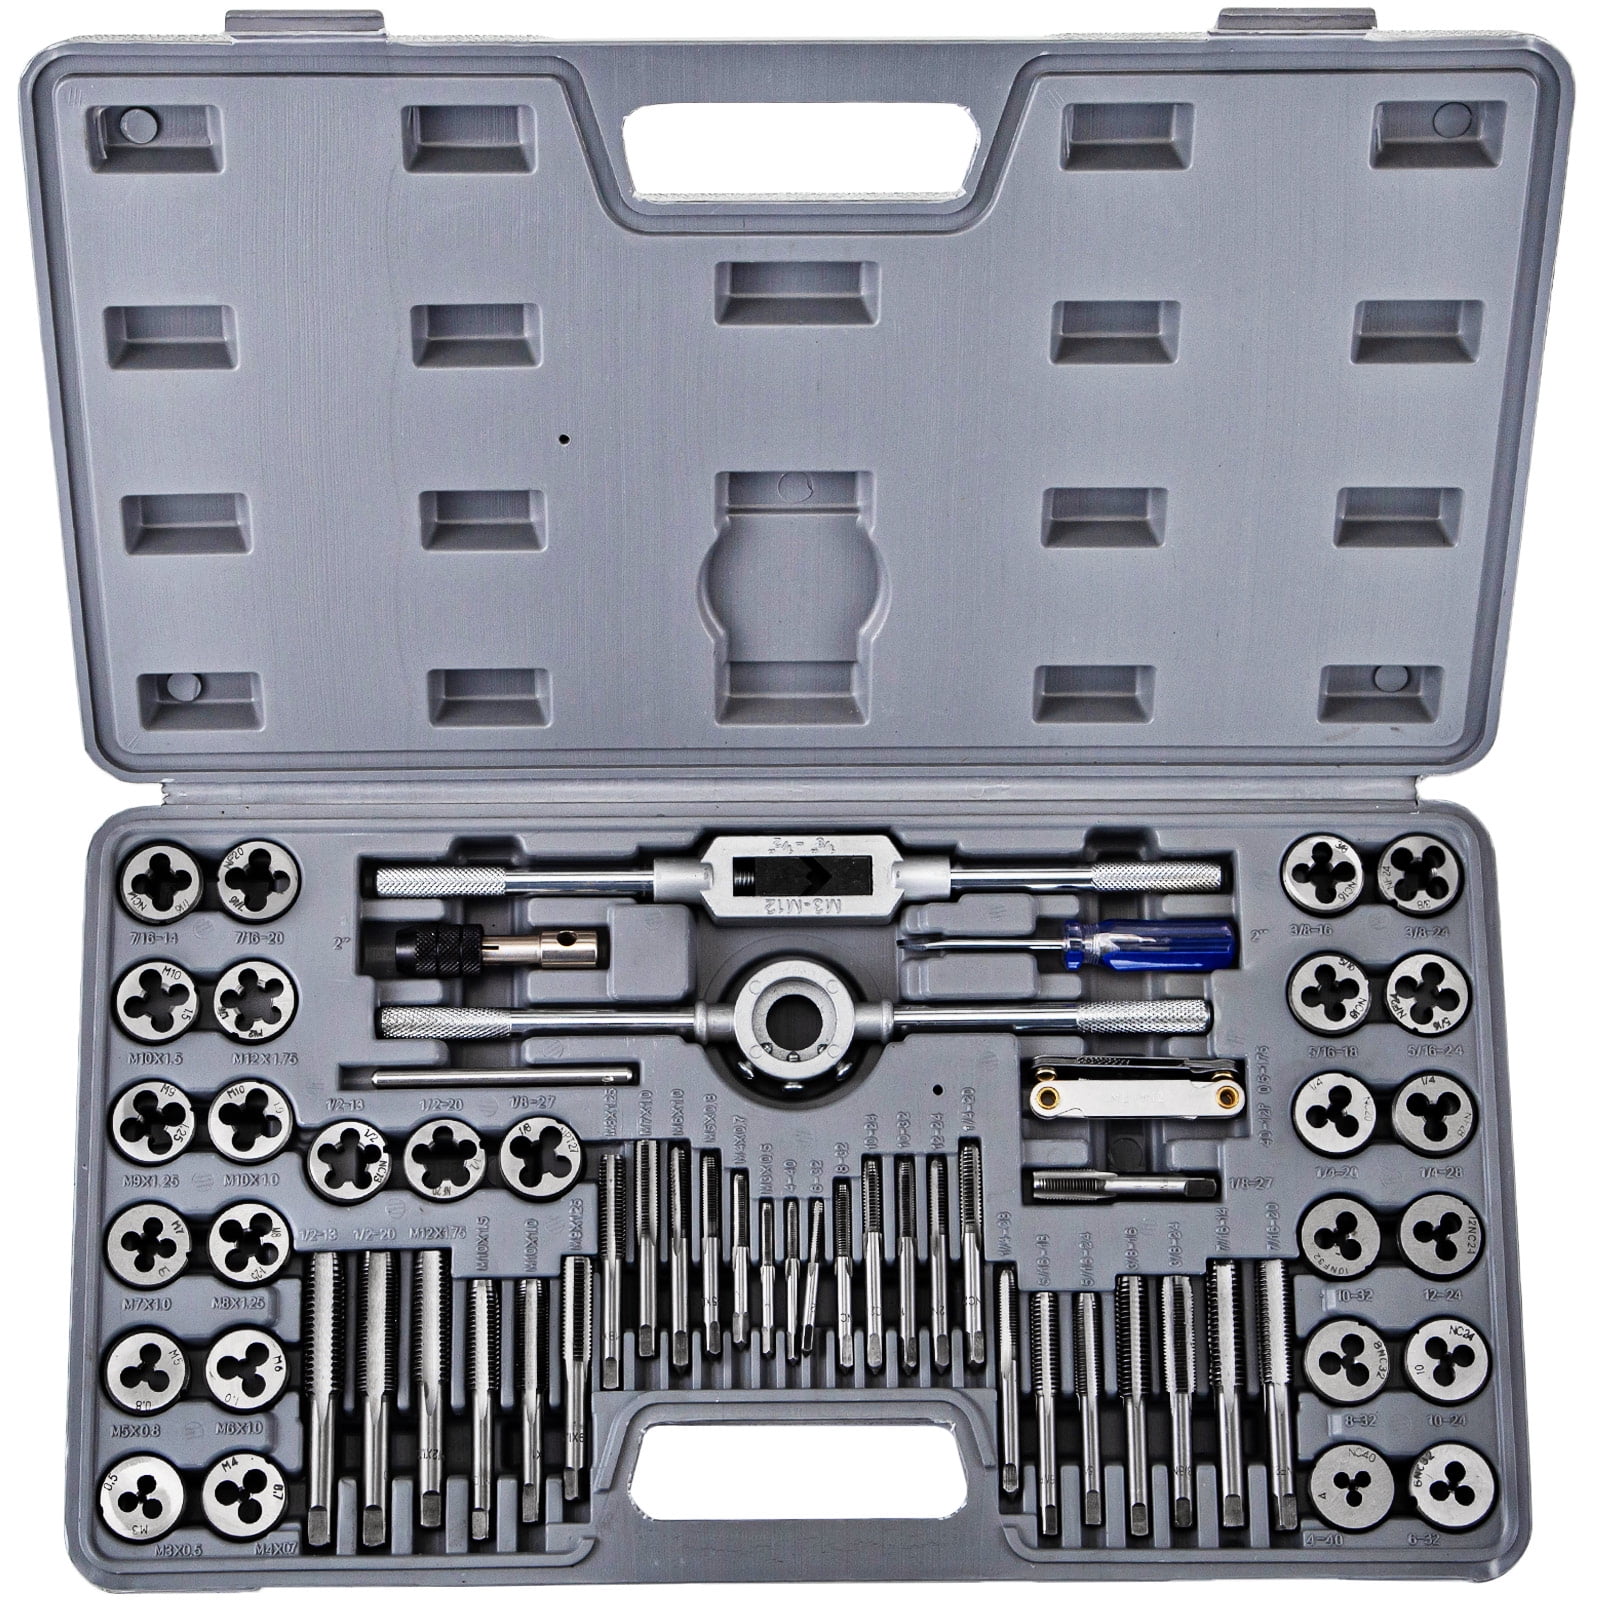 60° Metric Tools with Carrying Case,Precision Metric Tool Tap & Die Combination Set for Cutting External and Internal Threads 110 Piece Tap and Die Set,Alloy Steel Tap & Die Set,55°